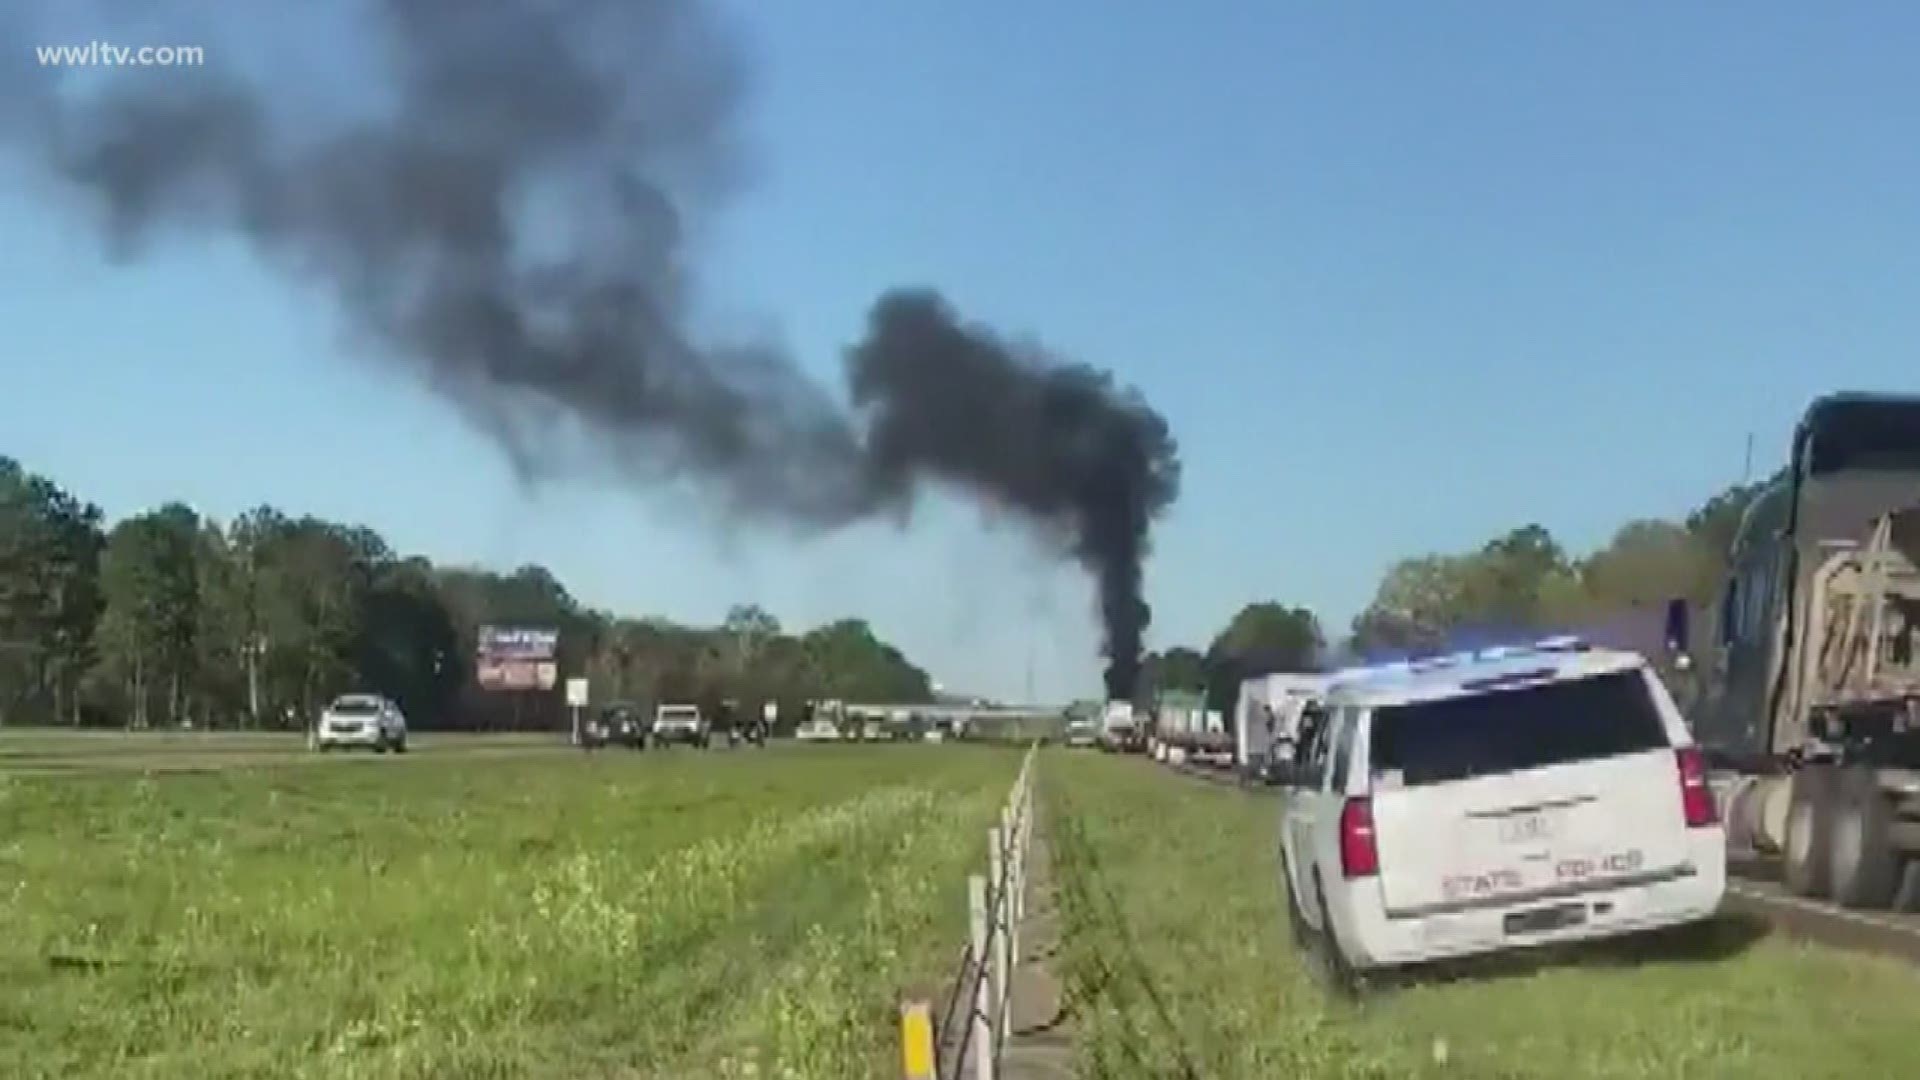 'Several' hurt in fiery crash on I12 in Hammond, firefighters say